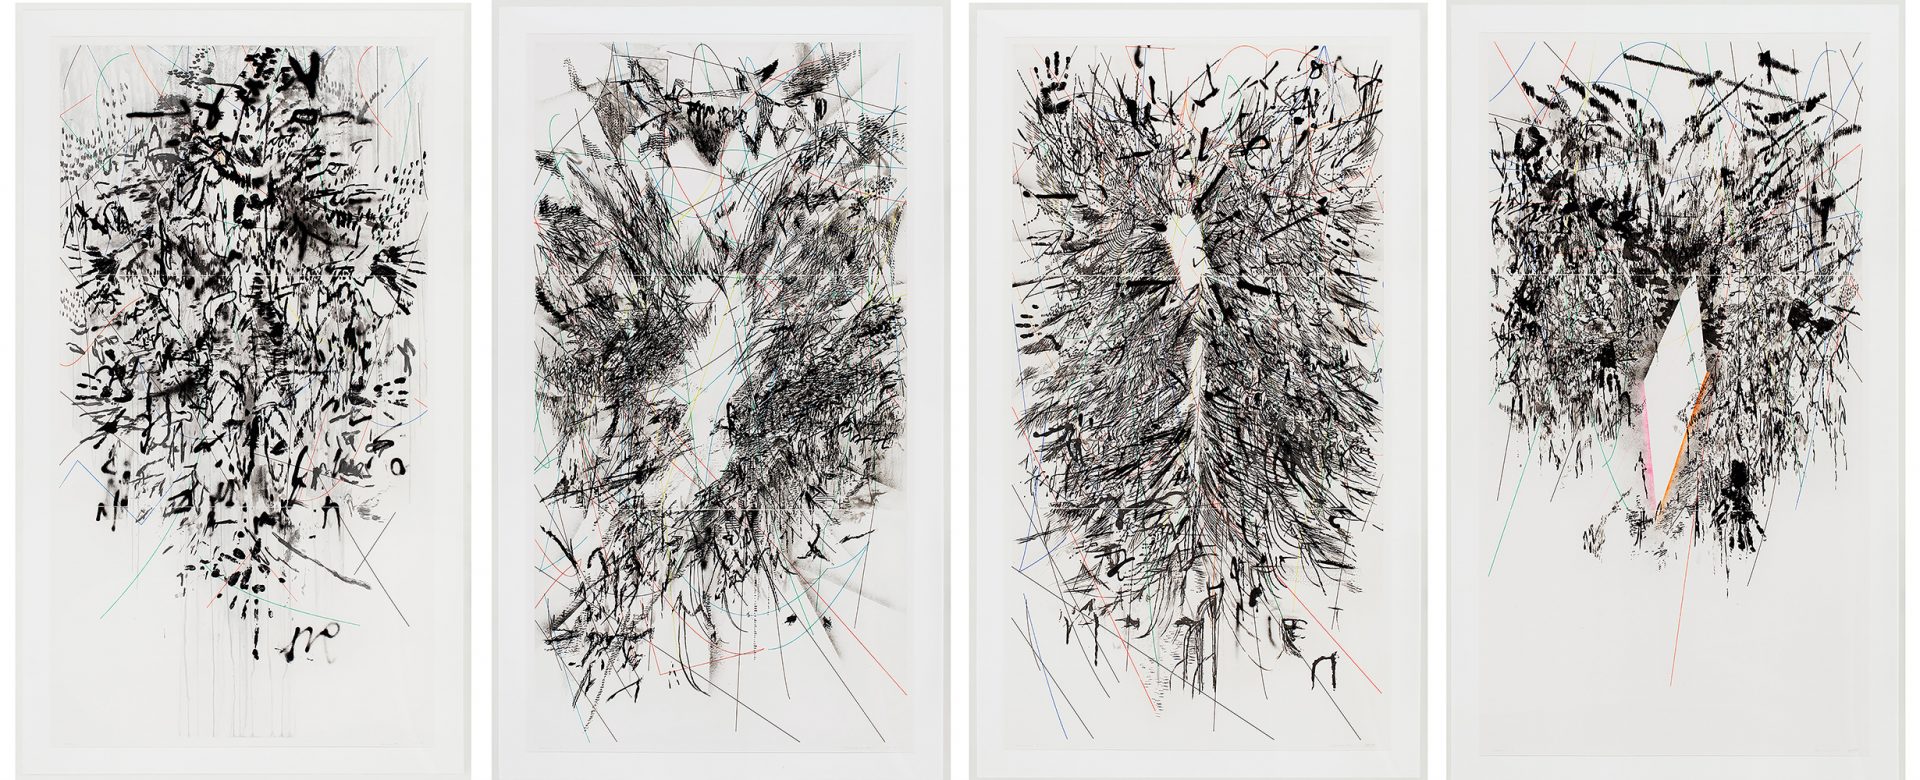 Four abstract drawings featuring black and white lines and various shapes, black handprints, and colored lines, all on a white background